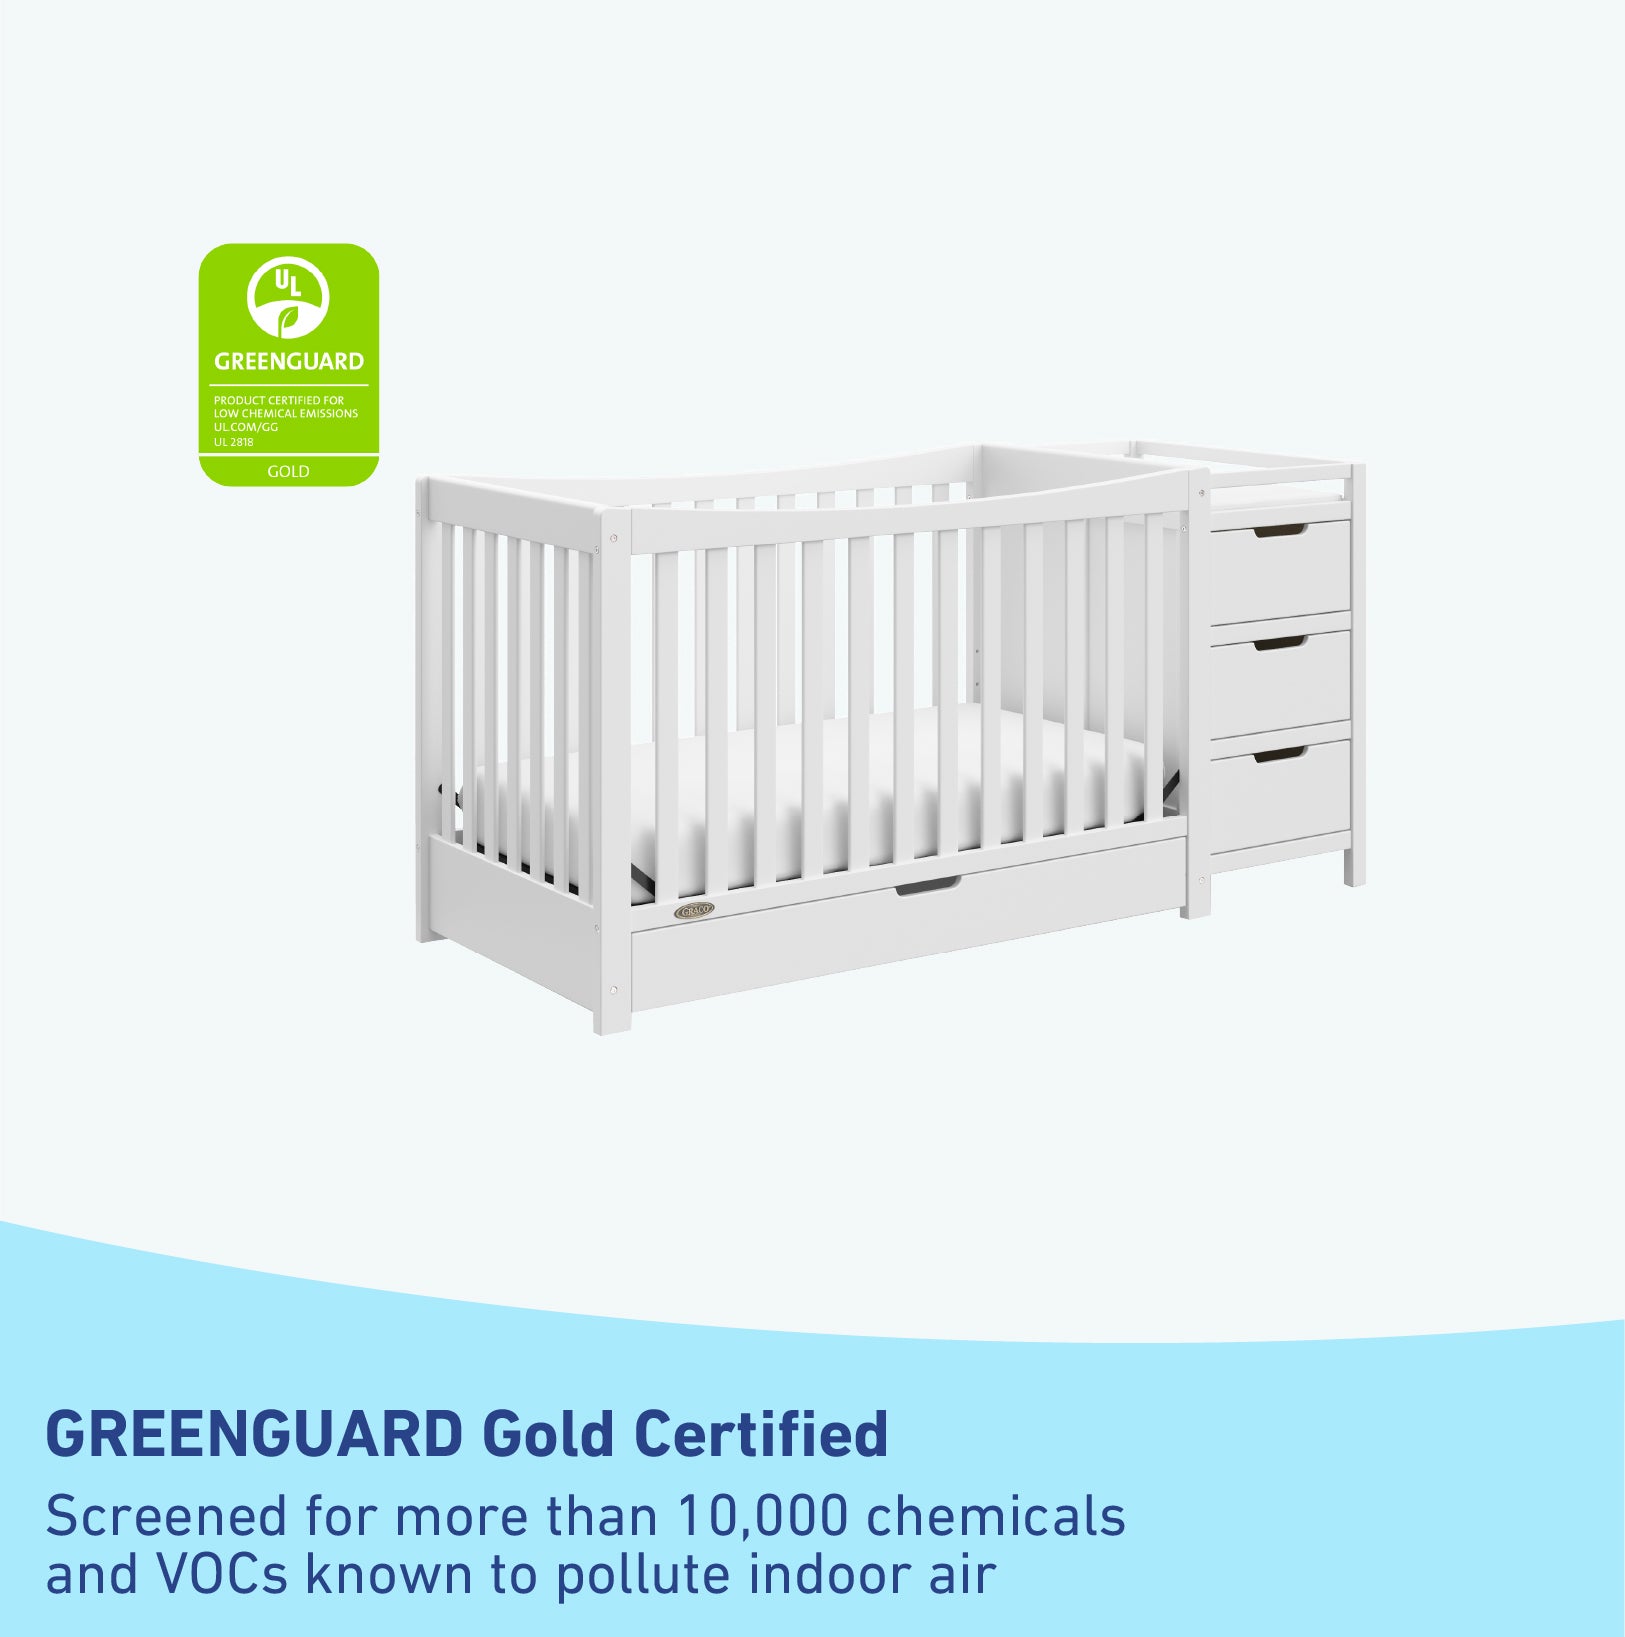 GREENGUARD Gold Certified White crib and changer